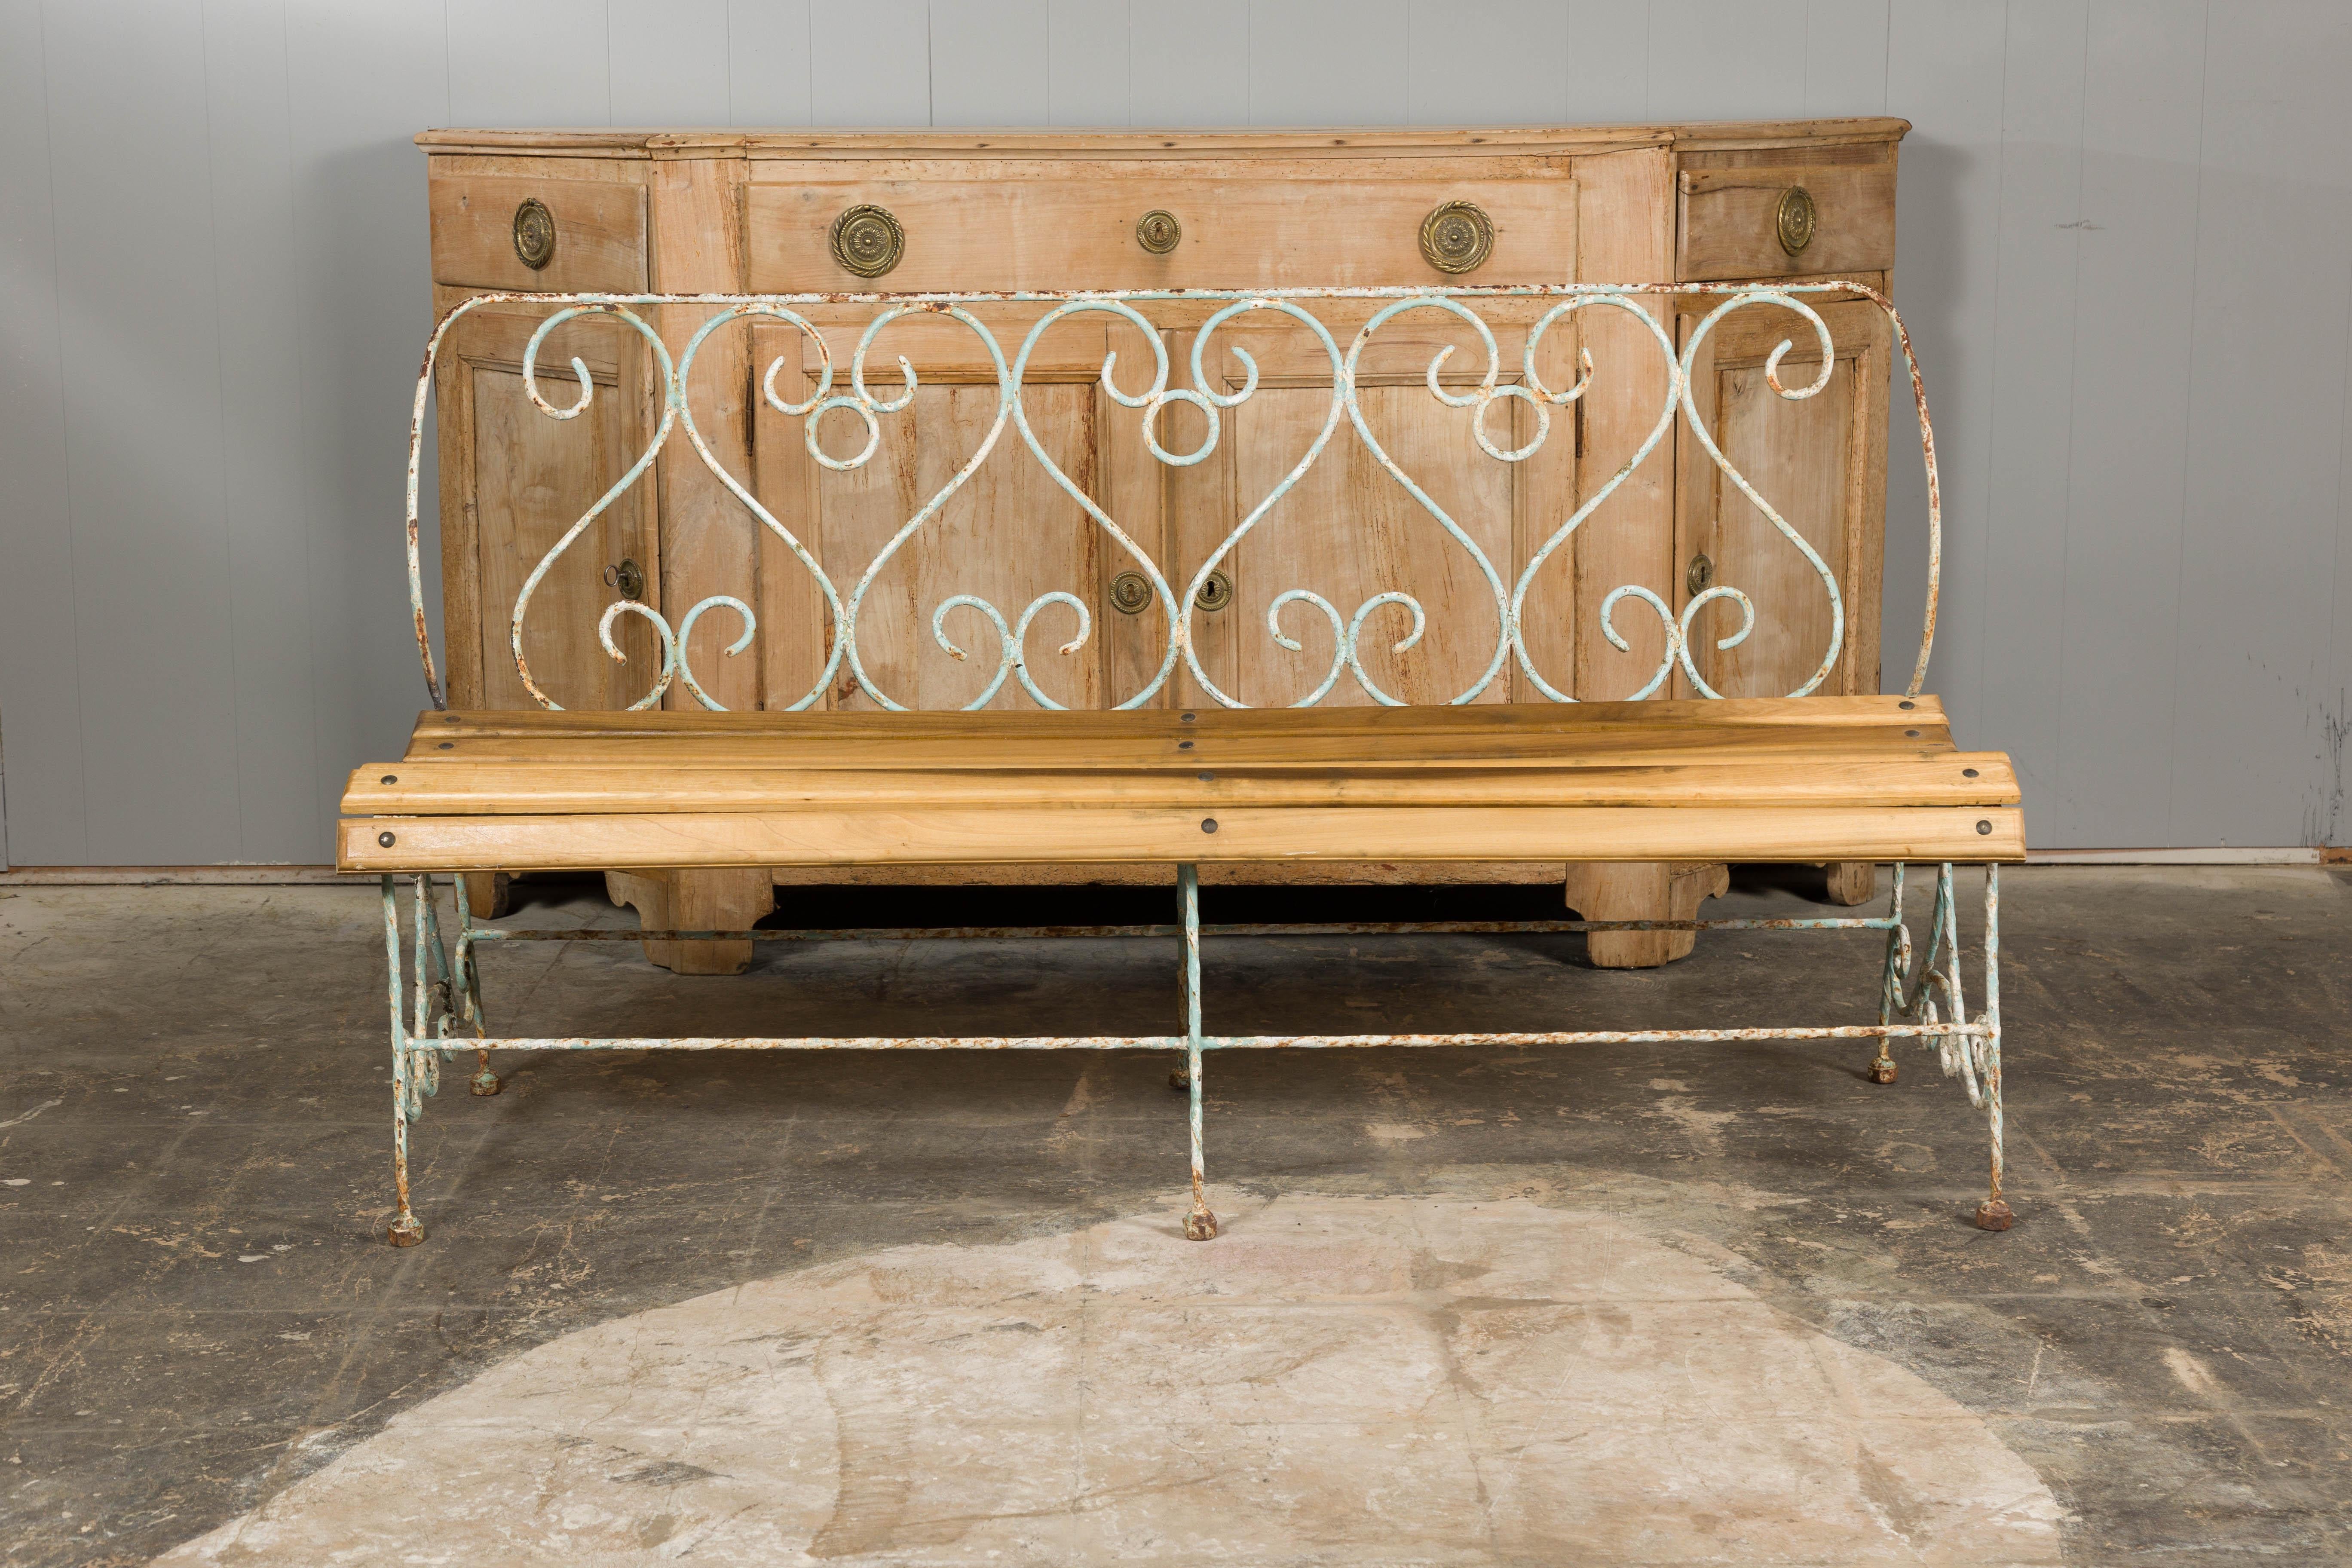 A French rustic, painted iron garden bench from the 19th century with scrolling motifs on the back, curving slatted seat and great weathered appearance. This 19th-century French rustic painted iron garden bench exudes a timeless charm, effortlessly